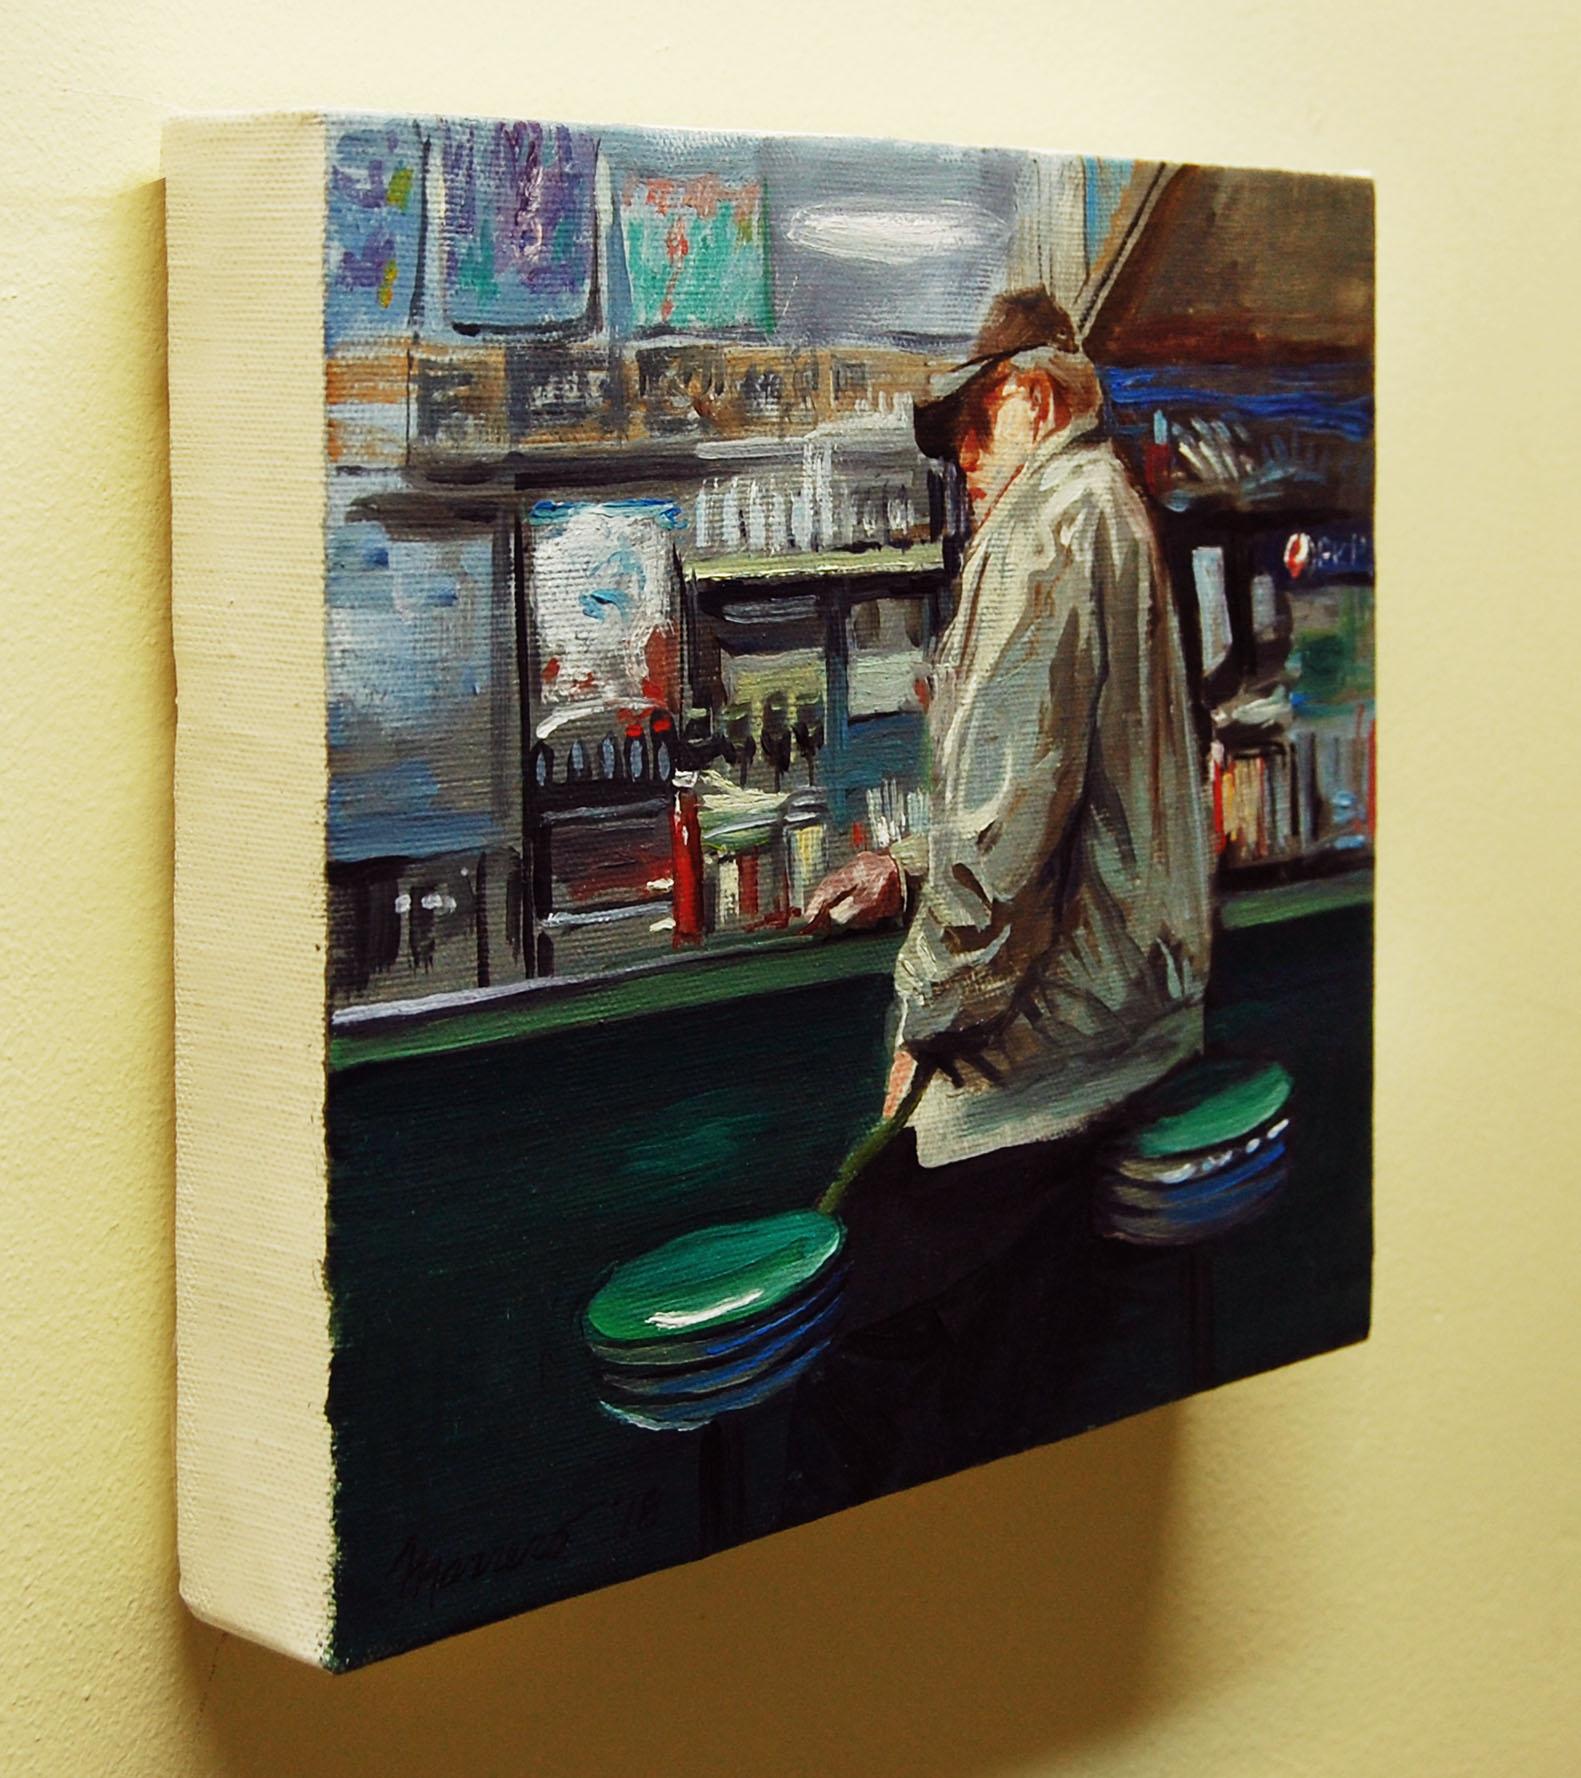 At the Counter - Painting by Onelio Marrero